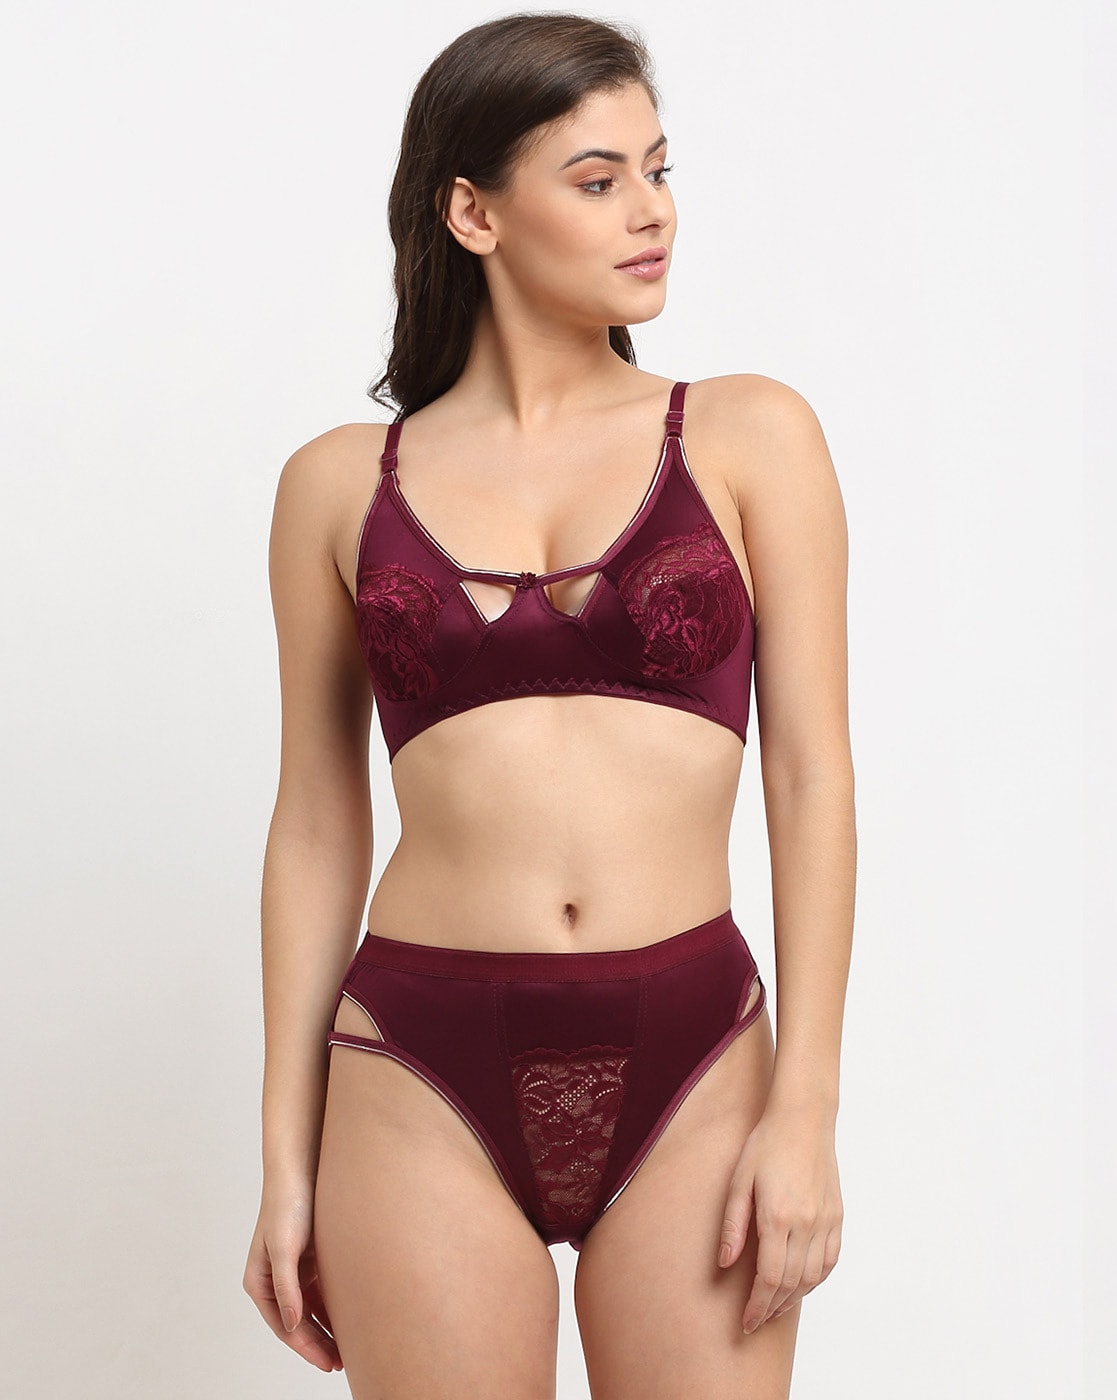 Buy LooksOMG's Lycra Bra & Panty Set in Red, Gold & Maroon Color Pack of 3  Online at Best Prices in India - JioMart.